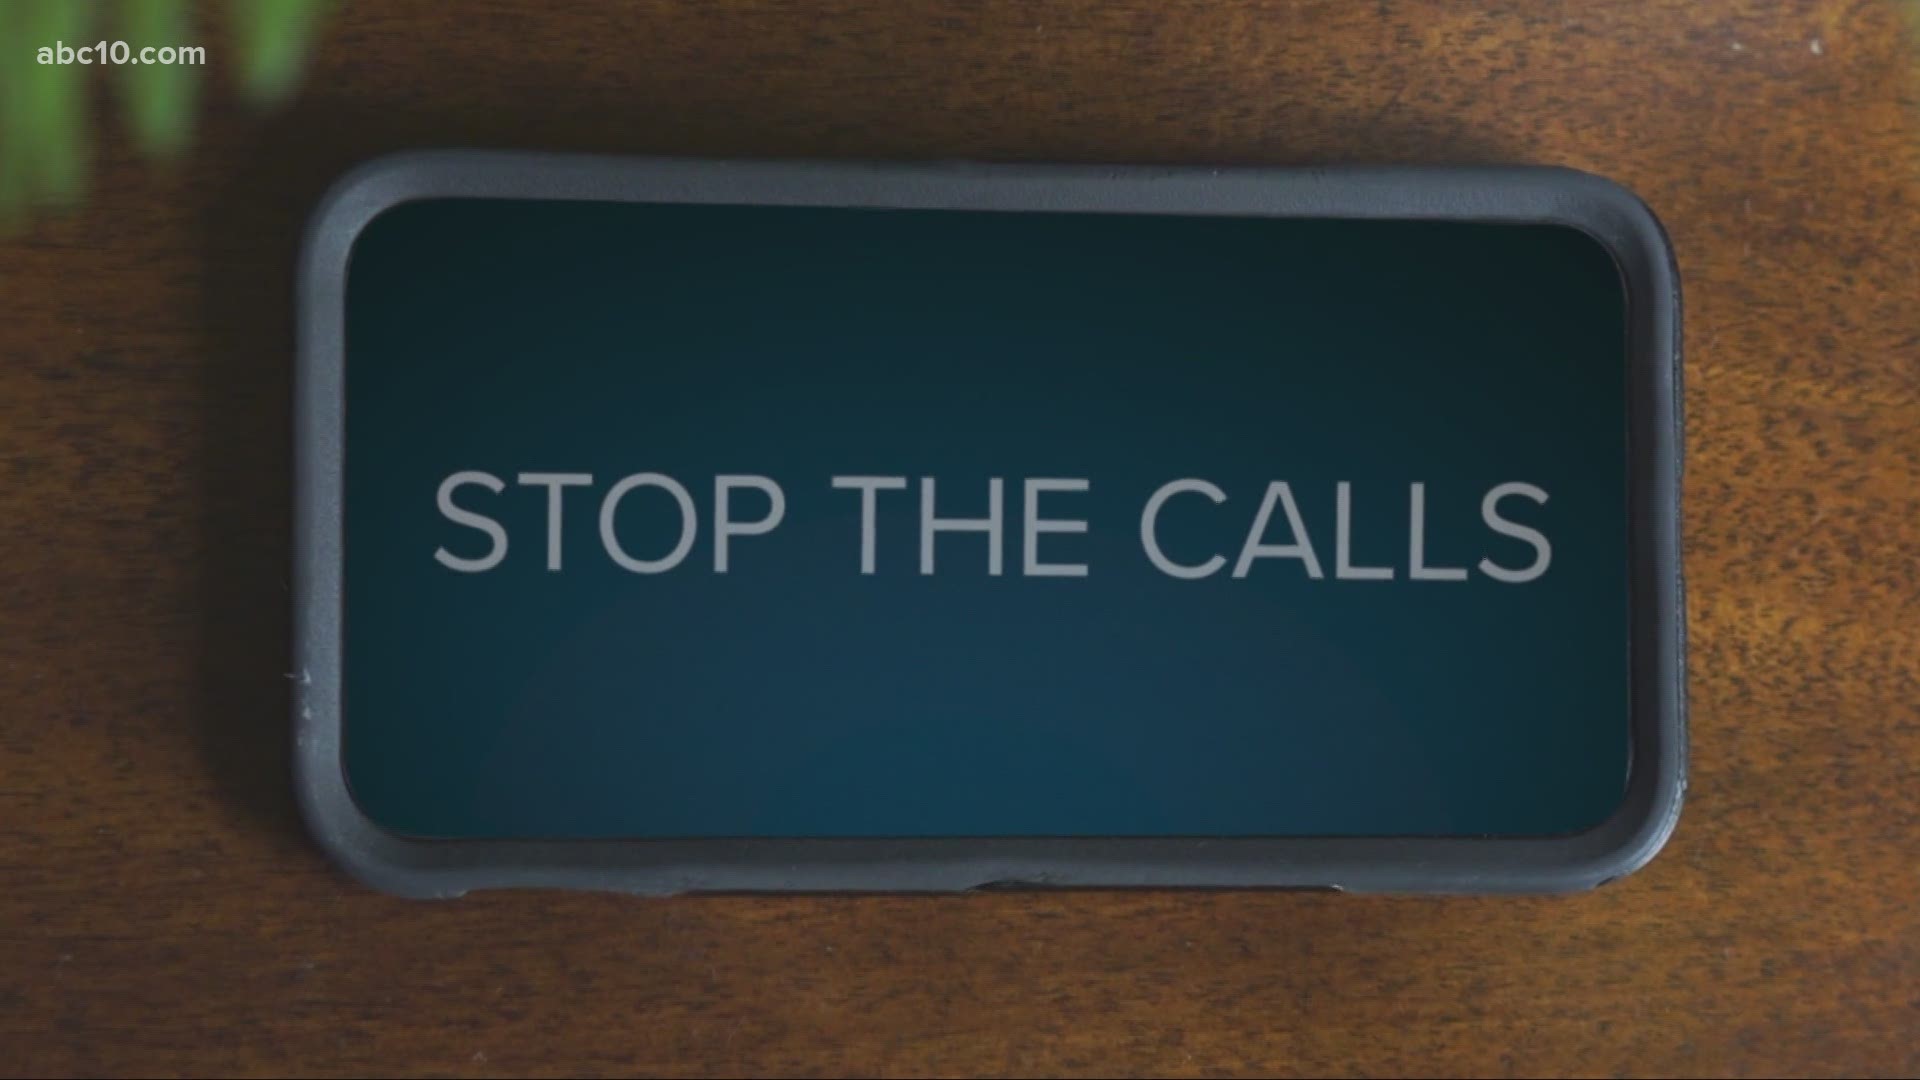 No matter how hard you try to avoid them, robocalls keep coming. Chris Thomas explains why this happens and how to avoid them in the future.